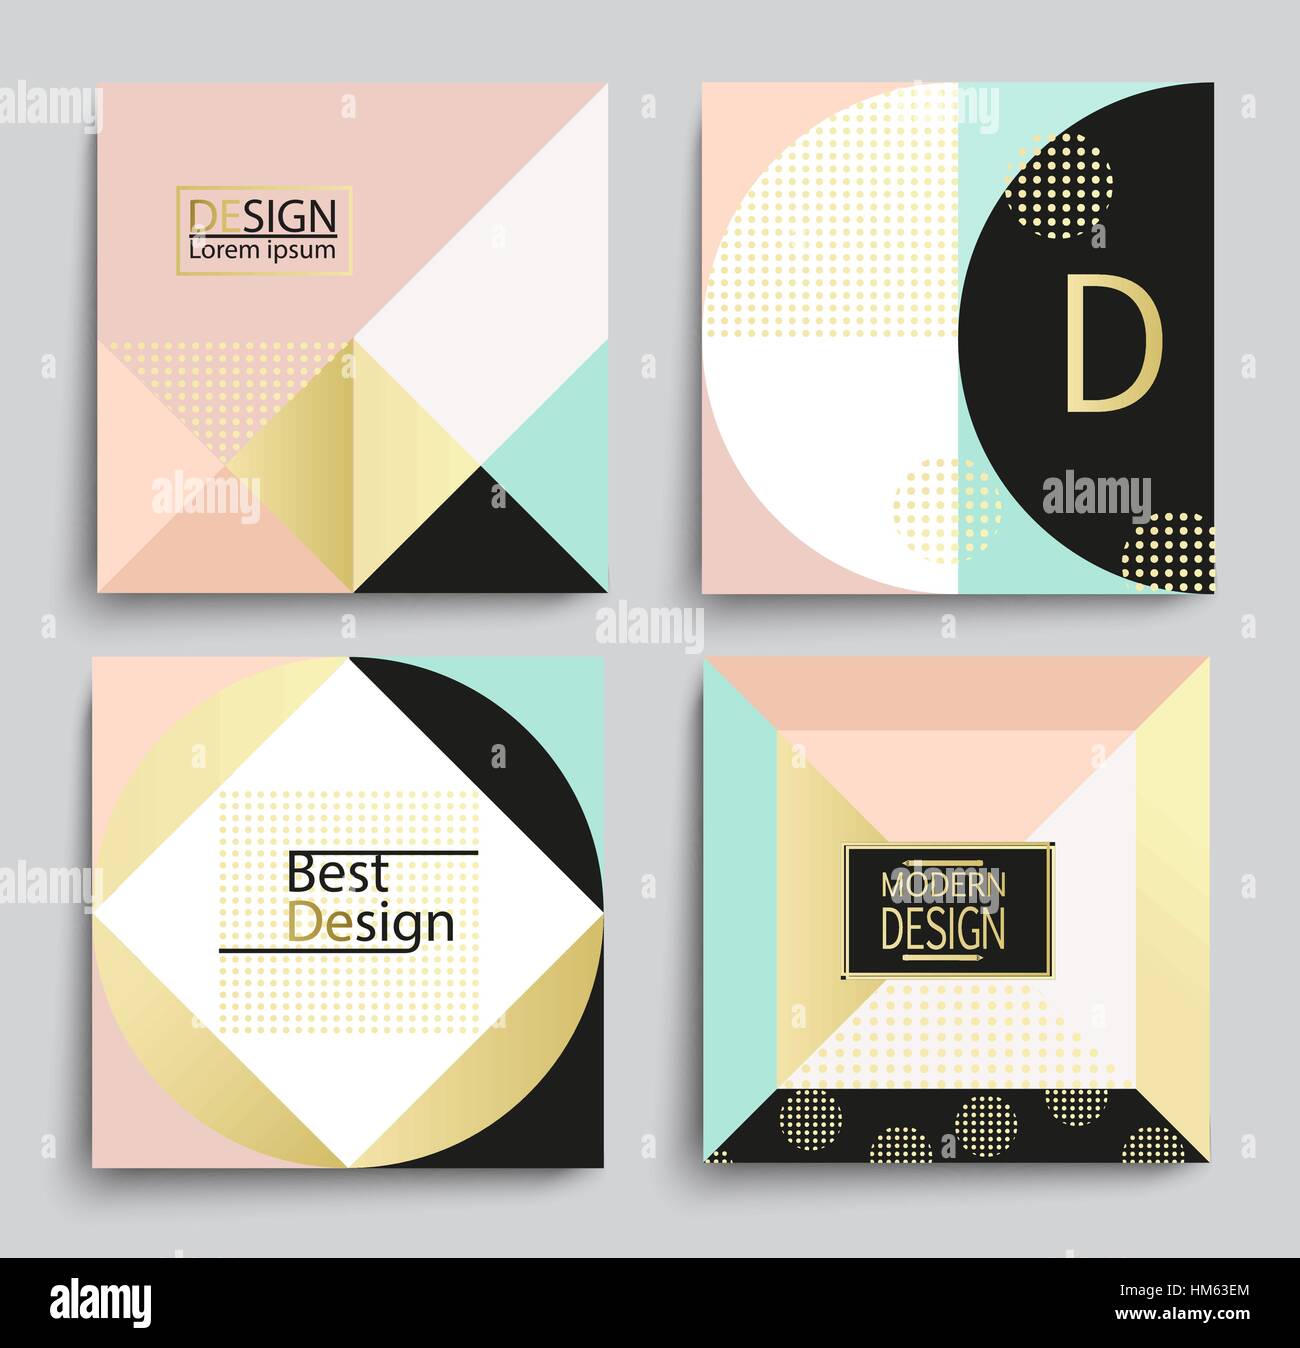 Set of elegant geometric banner template design, vector illustration. Applicable for Covers, Voucher, Posters, Flyers and Banner Designs. Stock Vector